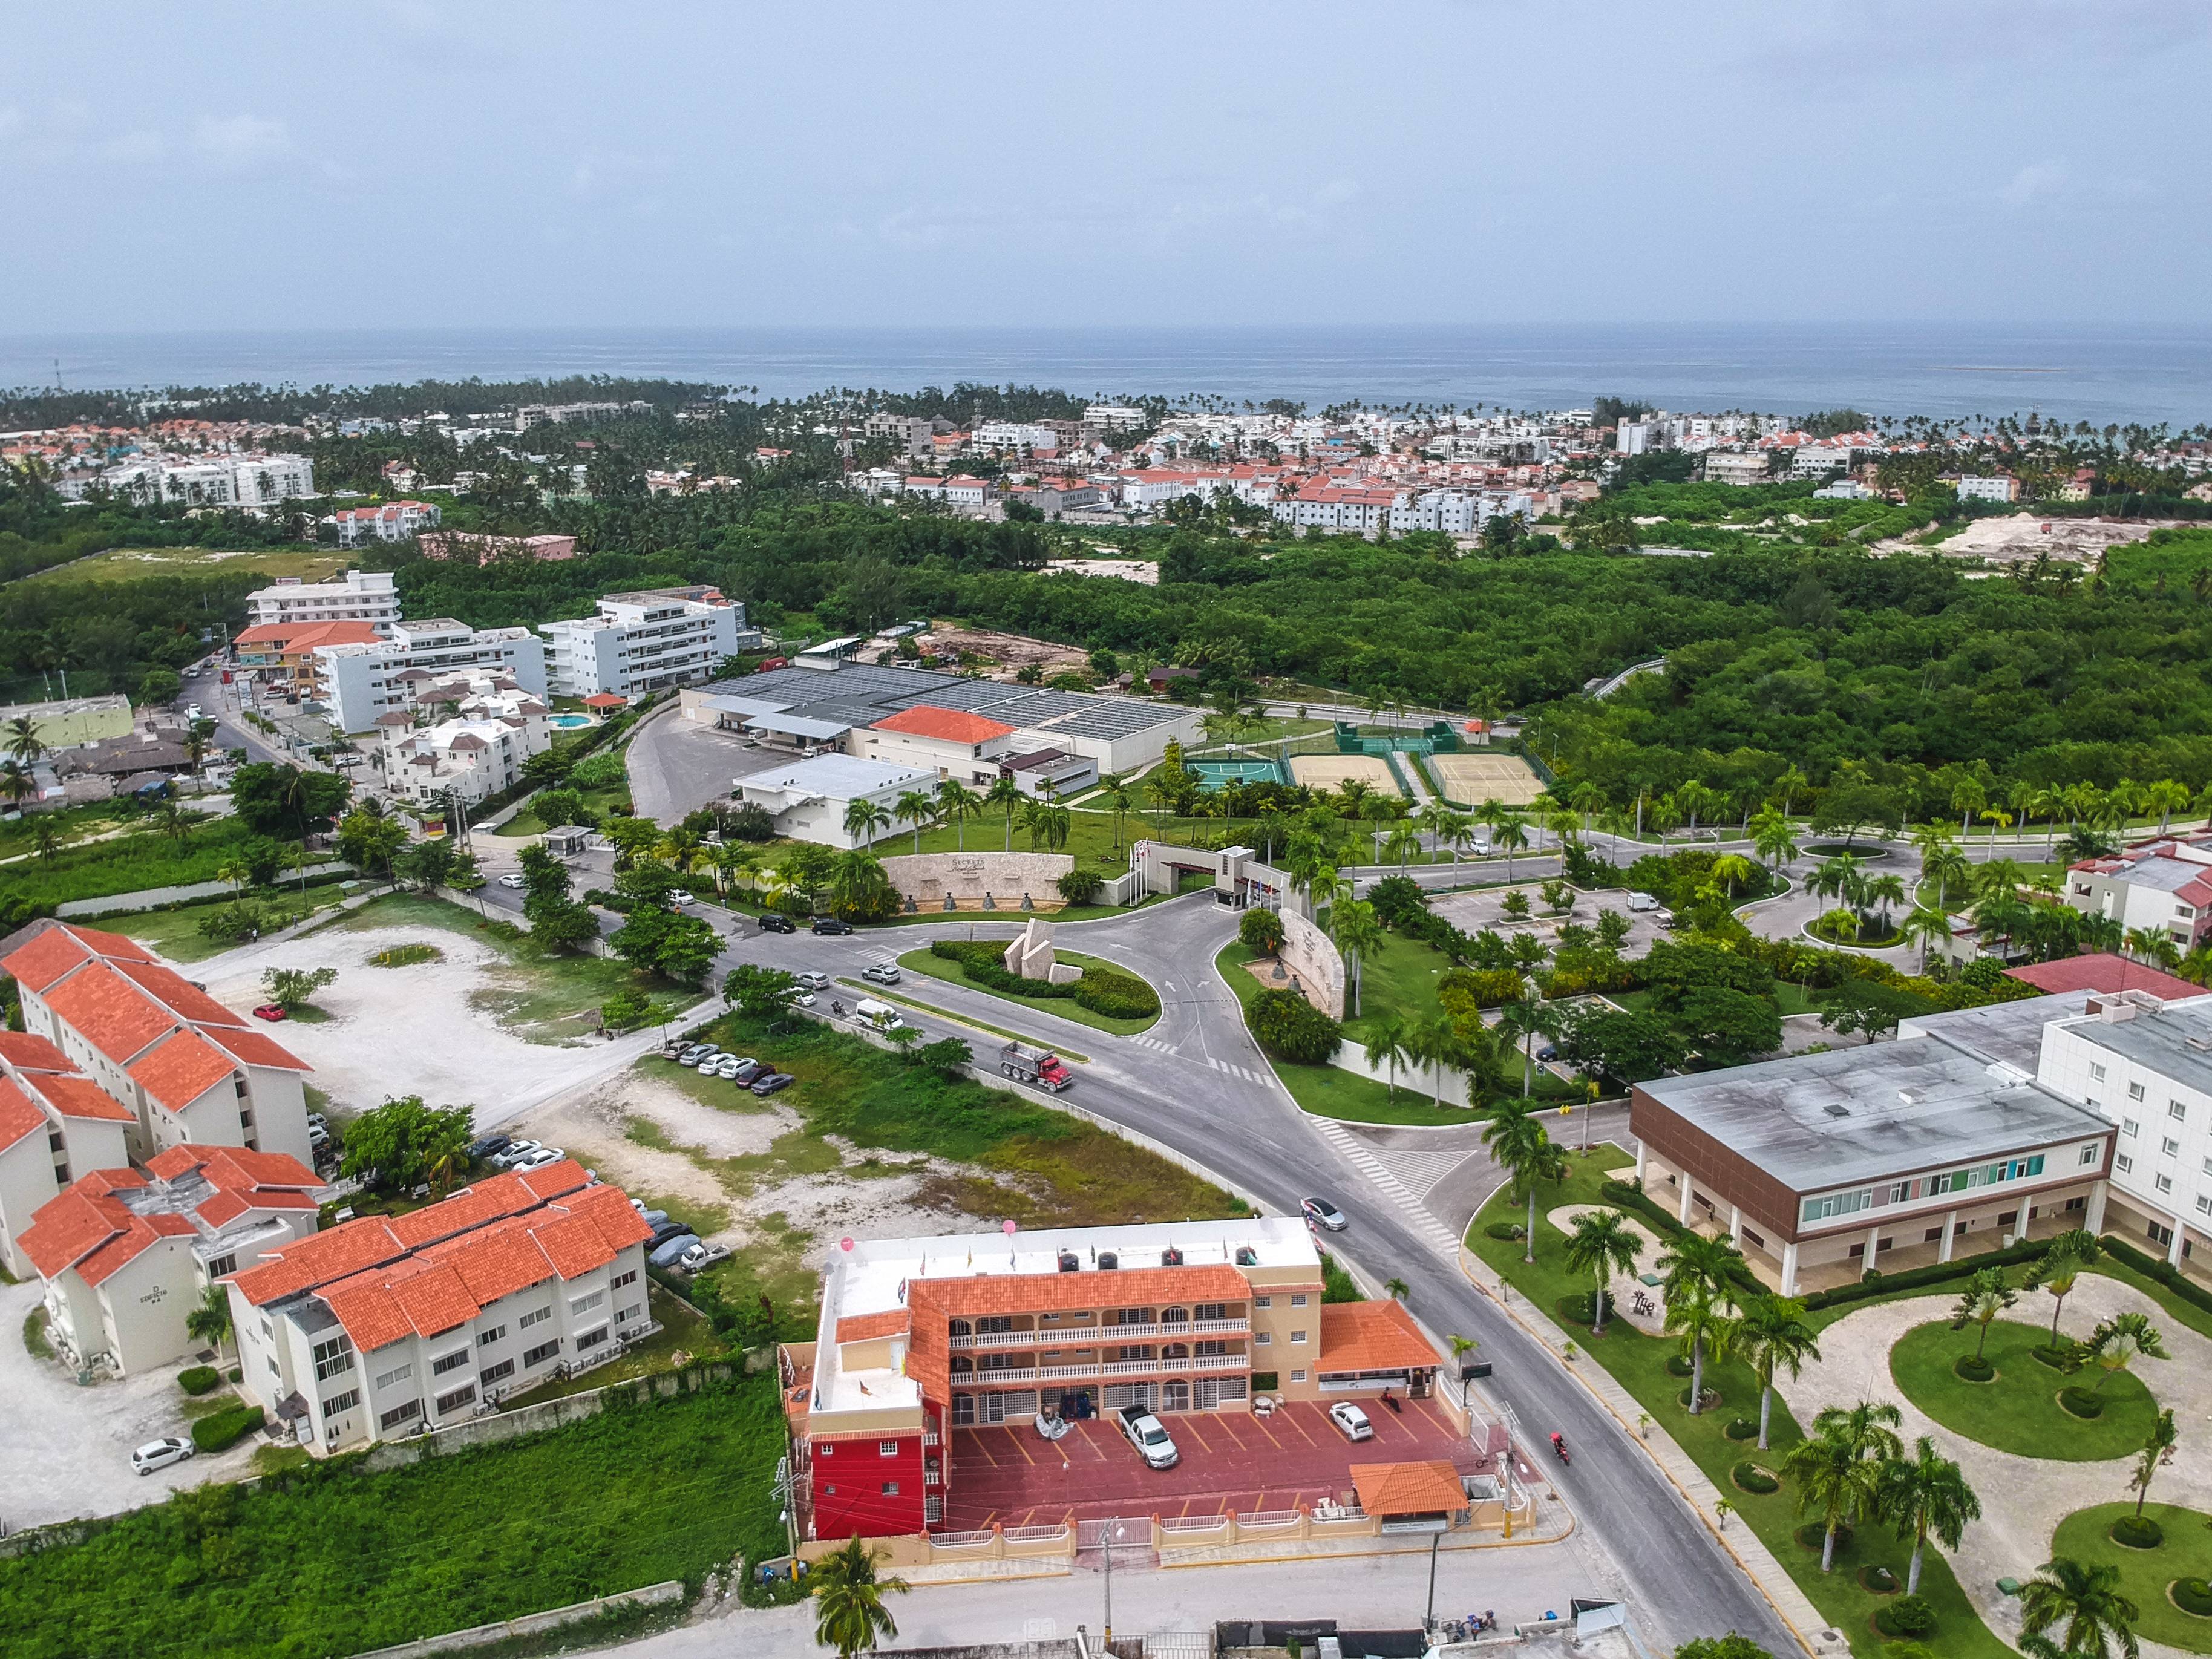 Punta Cana Investment Building | Mixed Use | 16 Apartments | 2 Commercial Spaces | Short Term Rentals Allowed | Central Location Neighboring Top Resorts